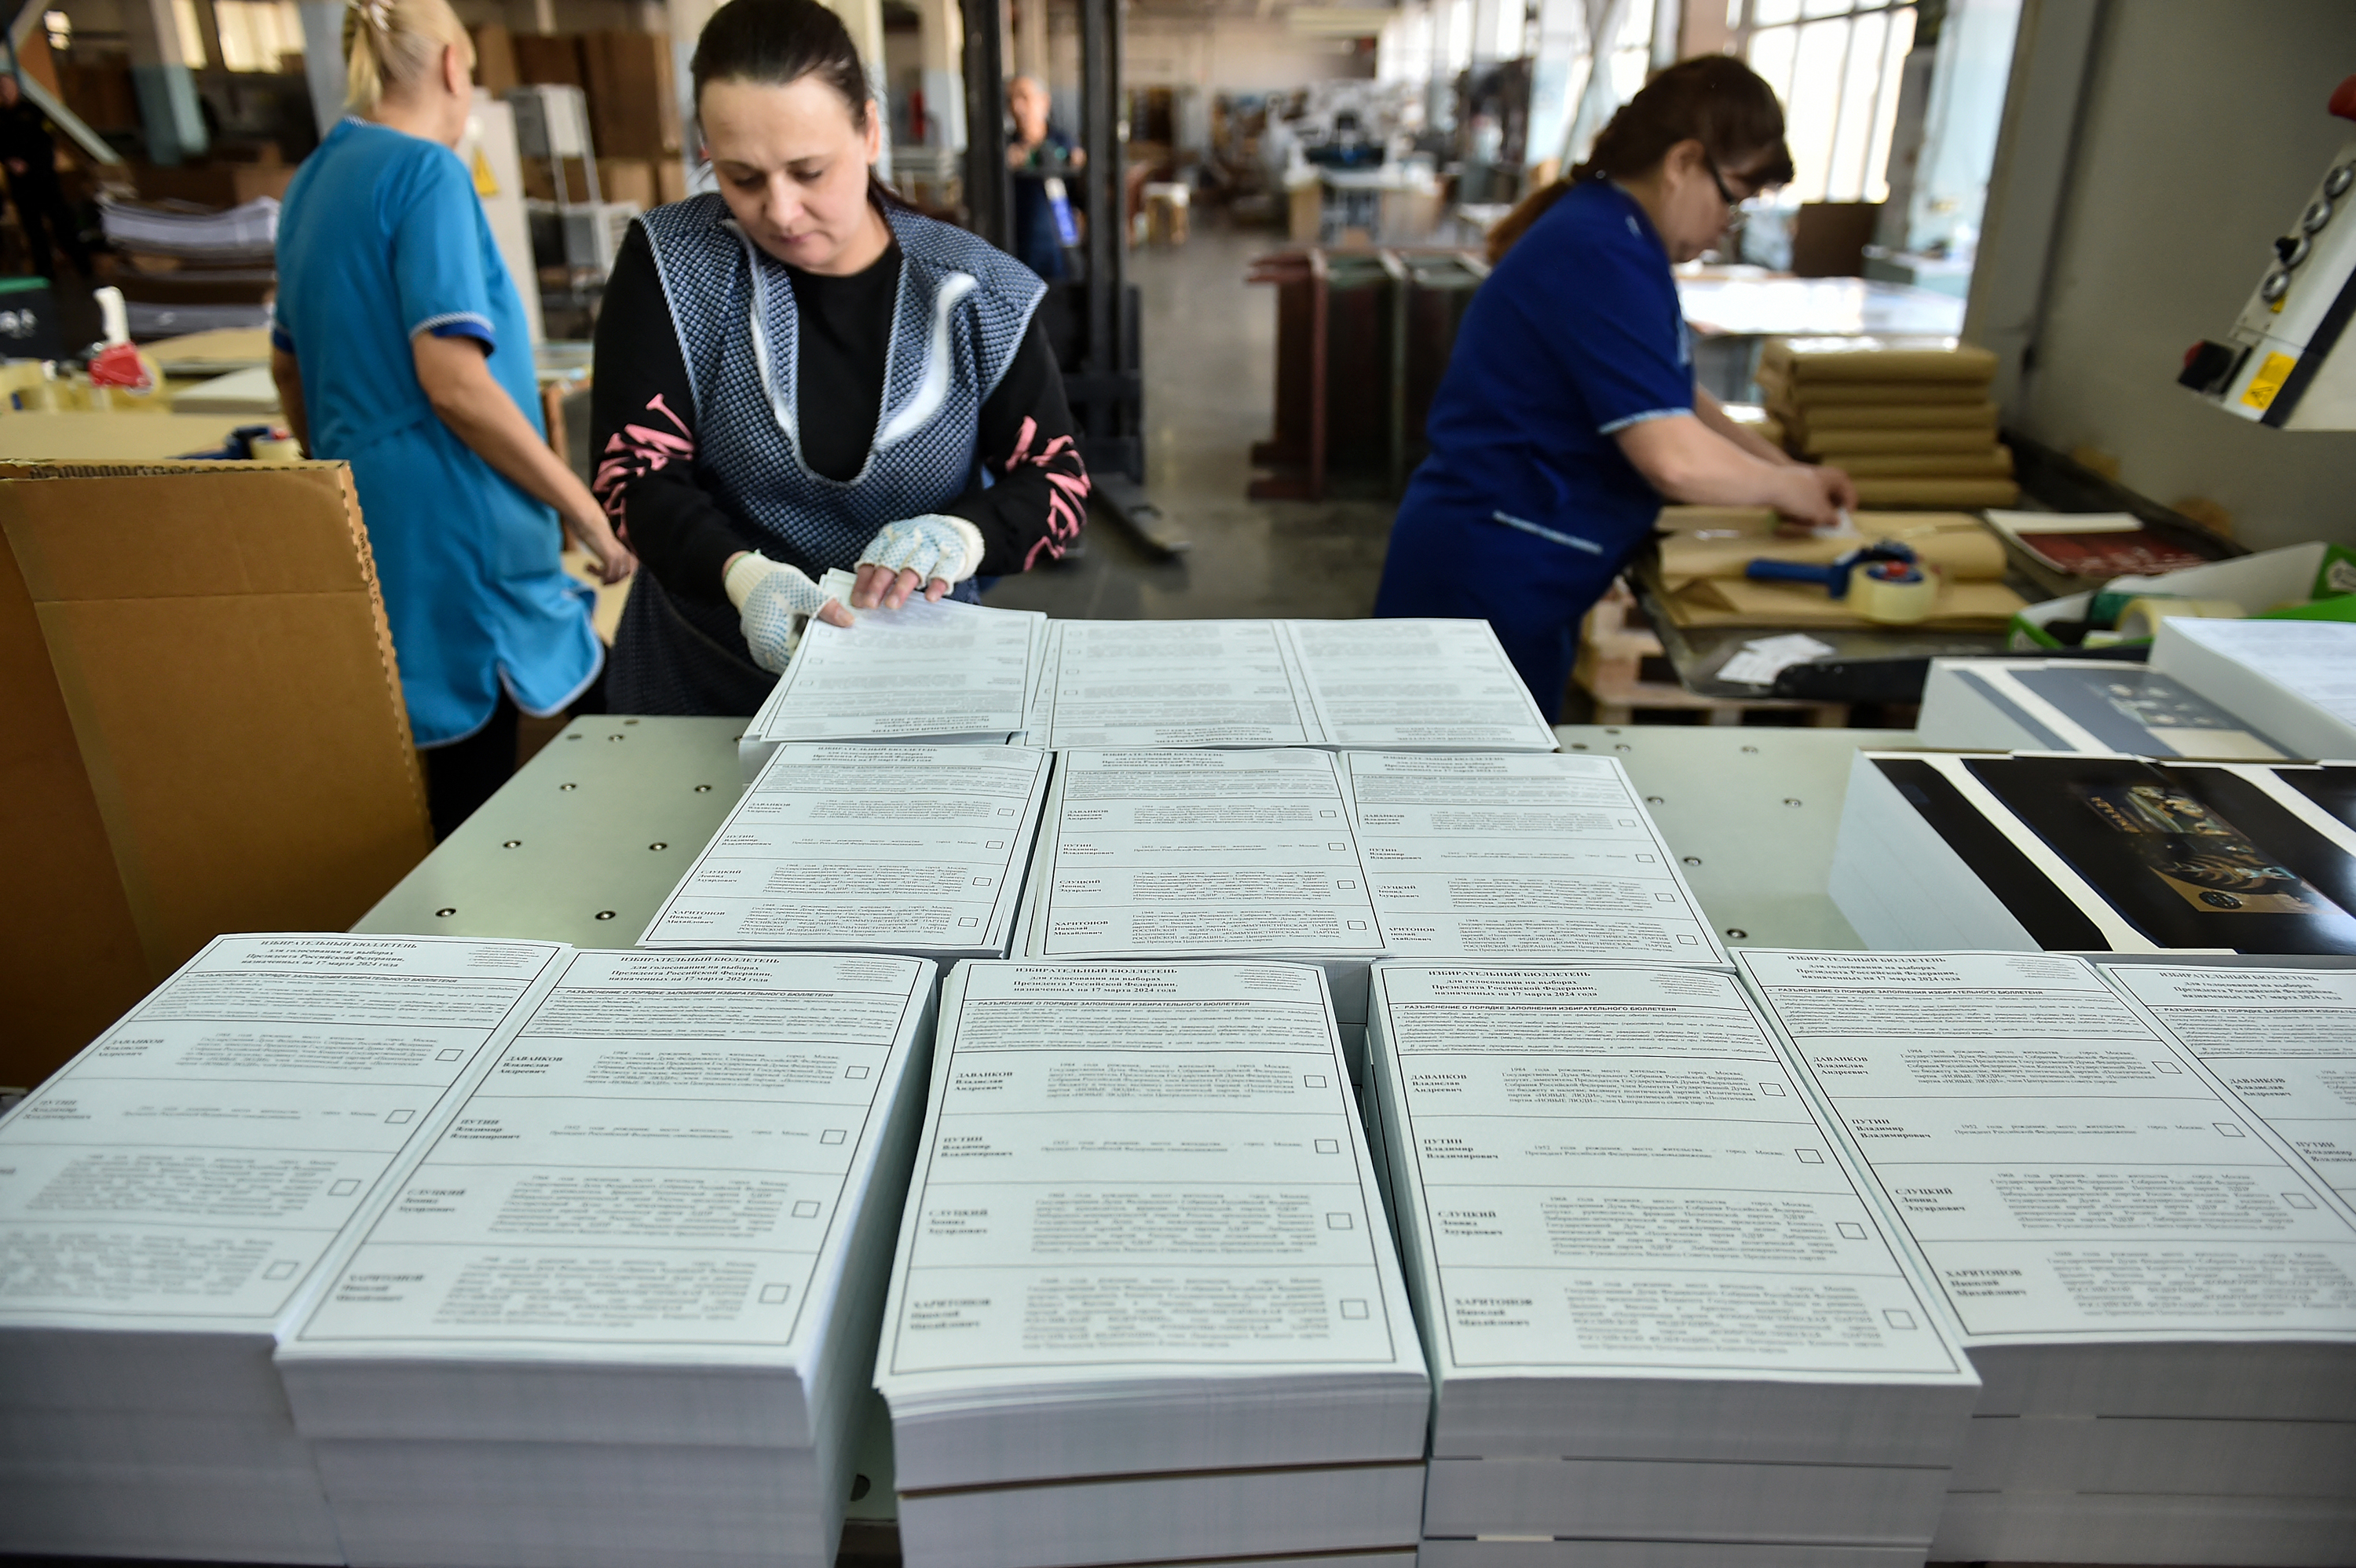 Ballot papers to be used in the 2024 Russian presidential election are pictured at a printing house in Novosibirsk, Russia, on February 22.